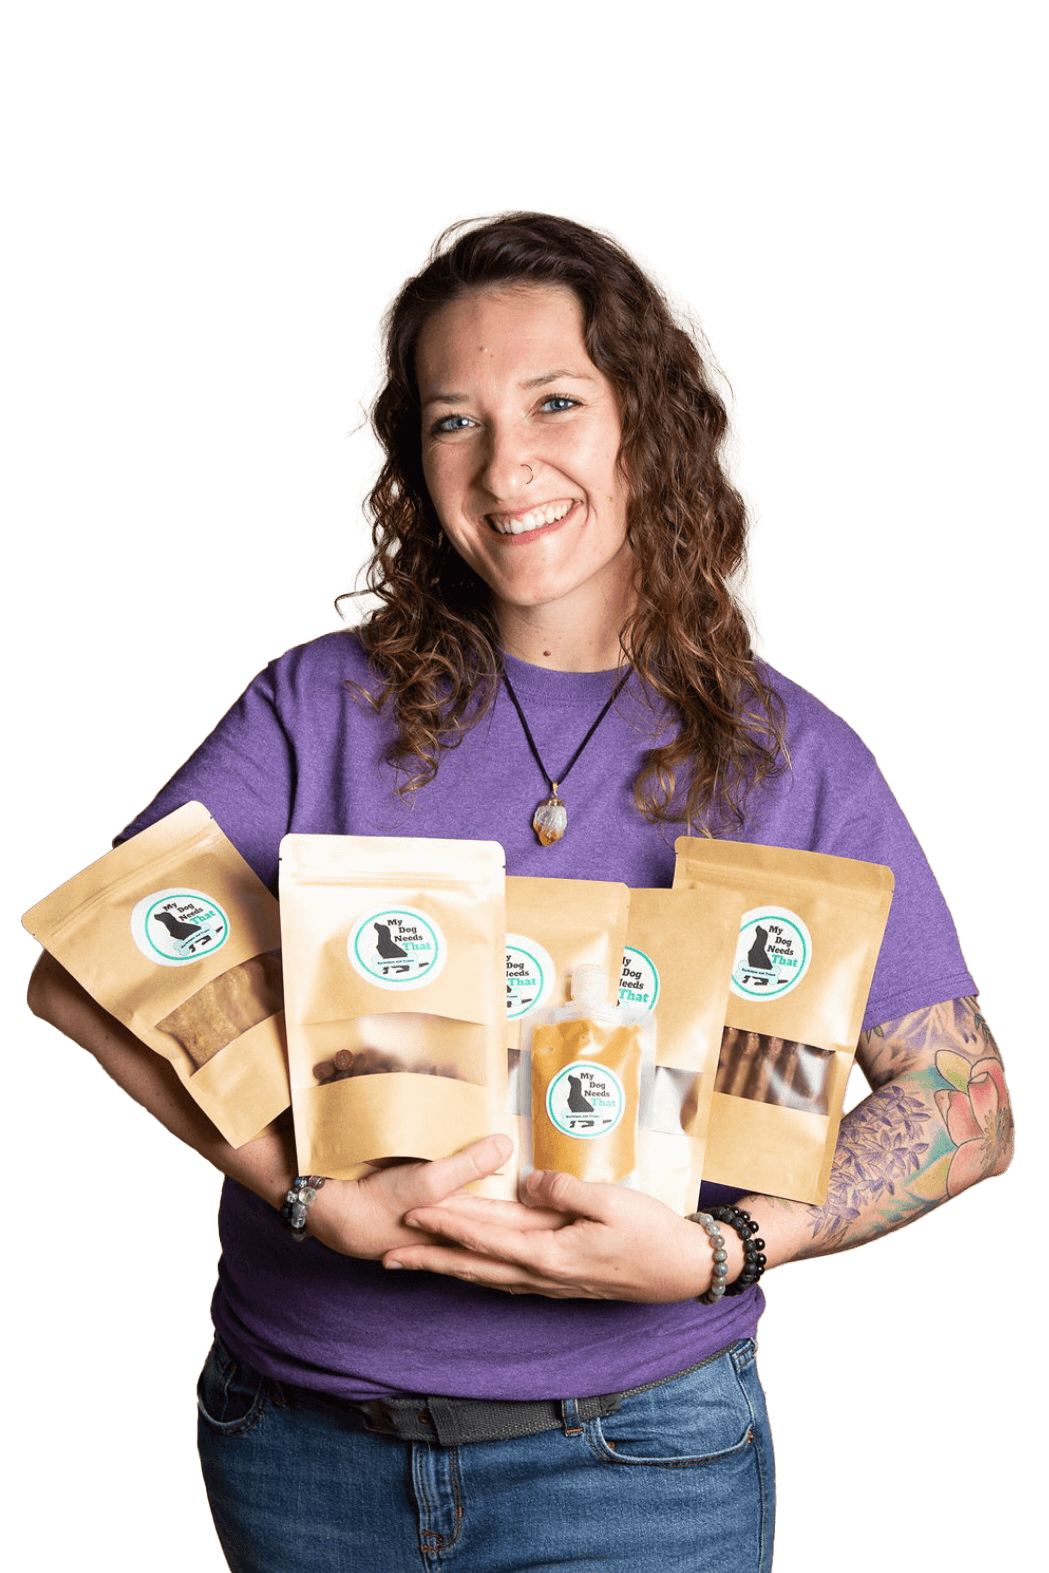 Gabby, the founder and owner of My Dog Needs That, holds bags of nutritious, carefully-made dog treats in her hands.